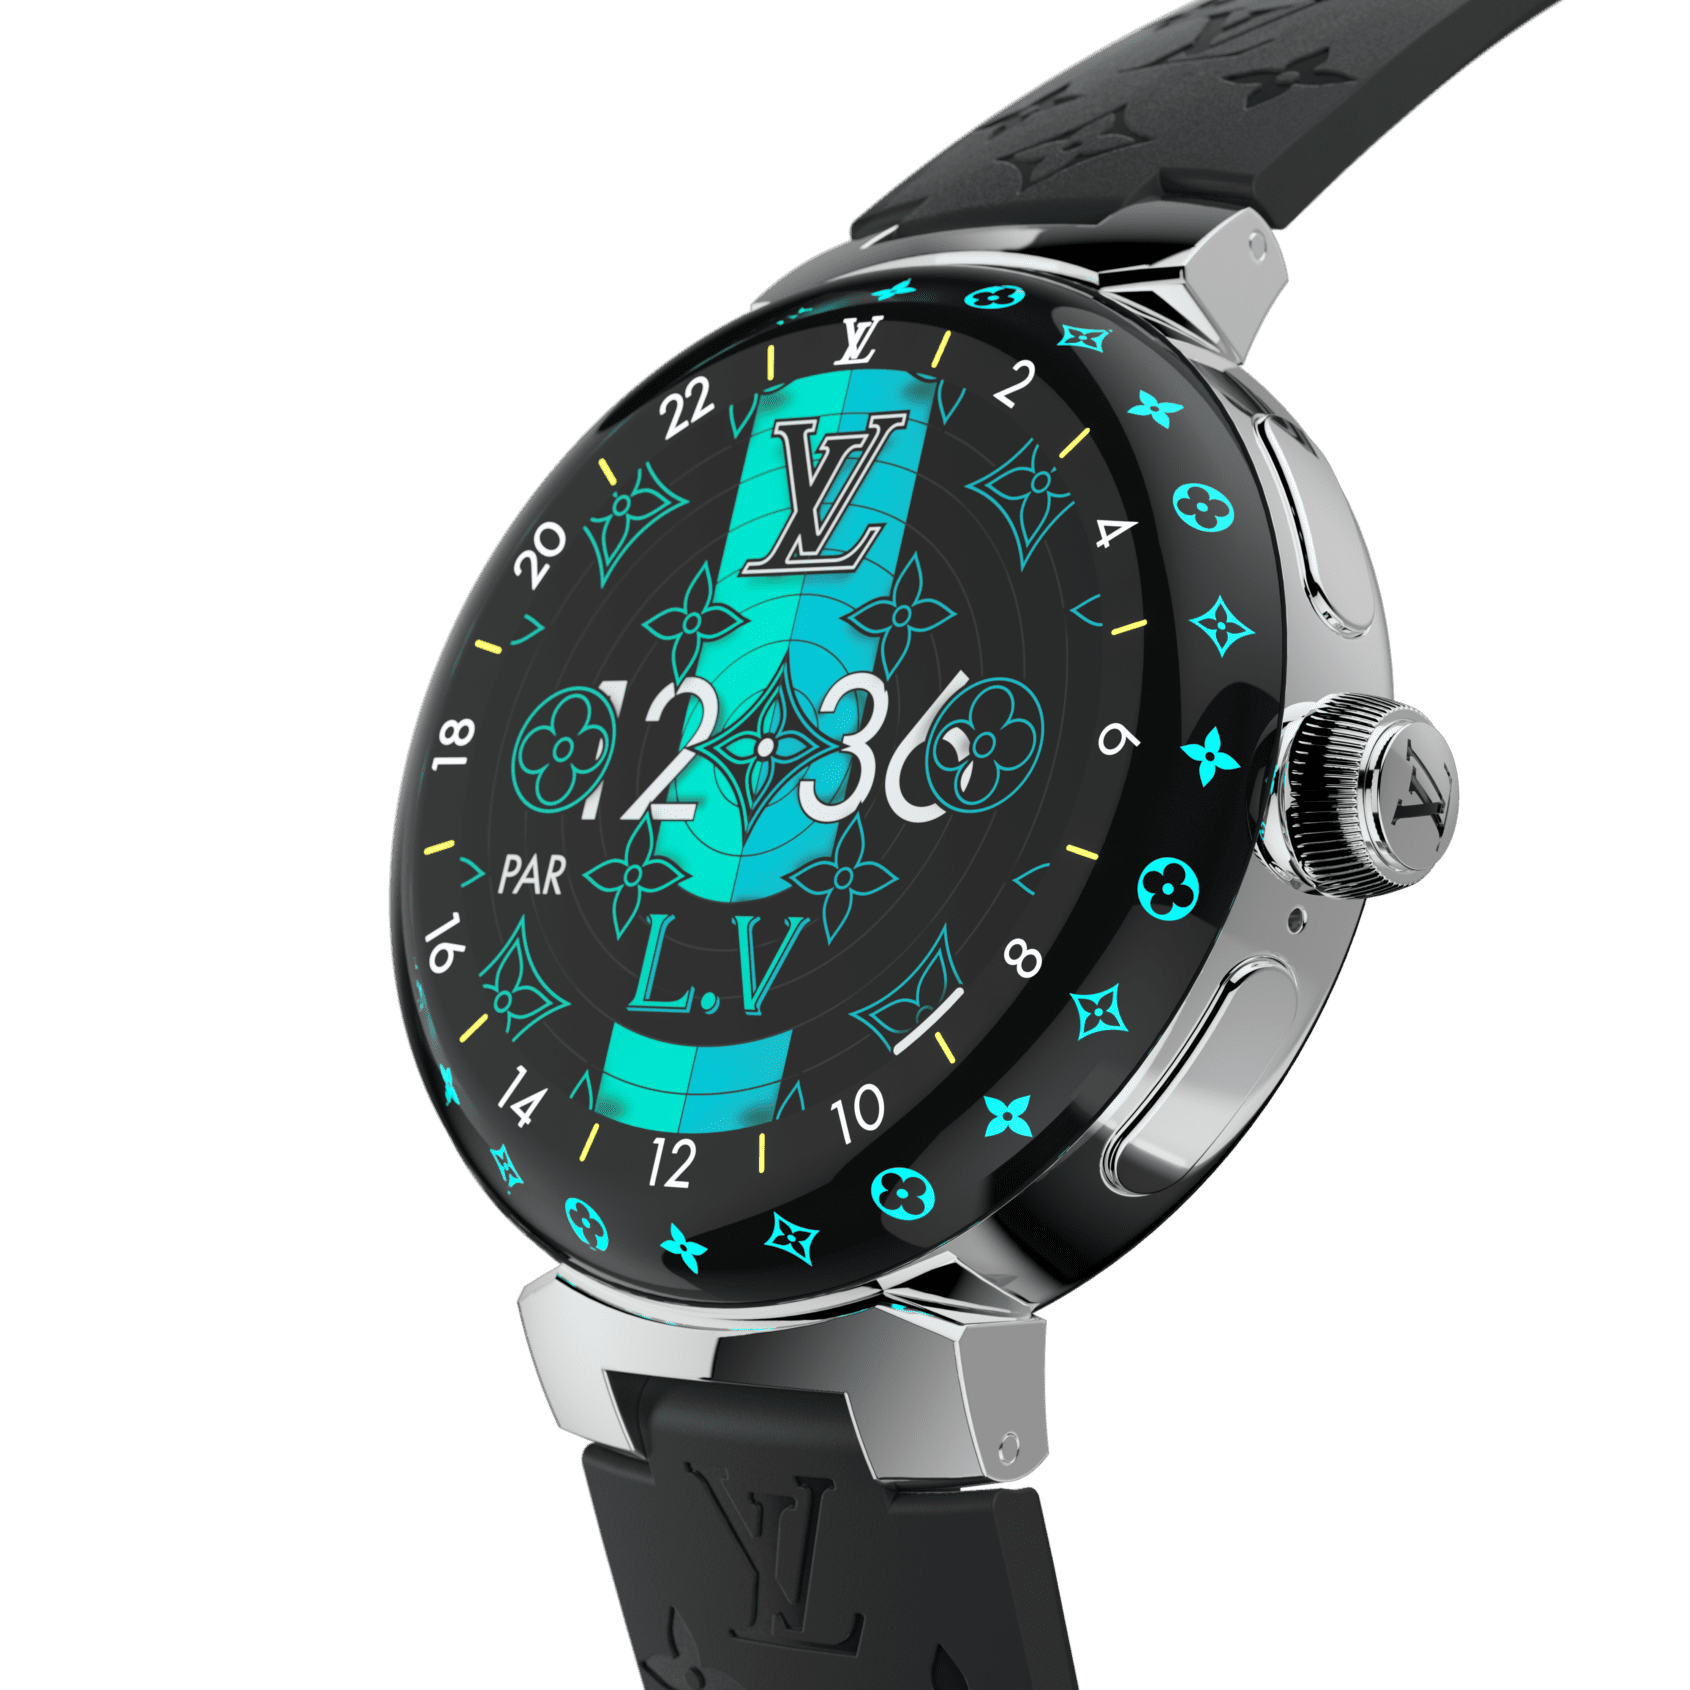 “Digital and luxury come together” – George Bamford reviews the new Louis Vuitton Tambour Horizon Light Up Digital